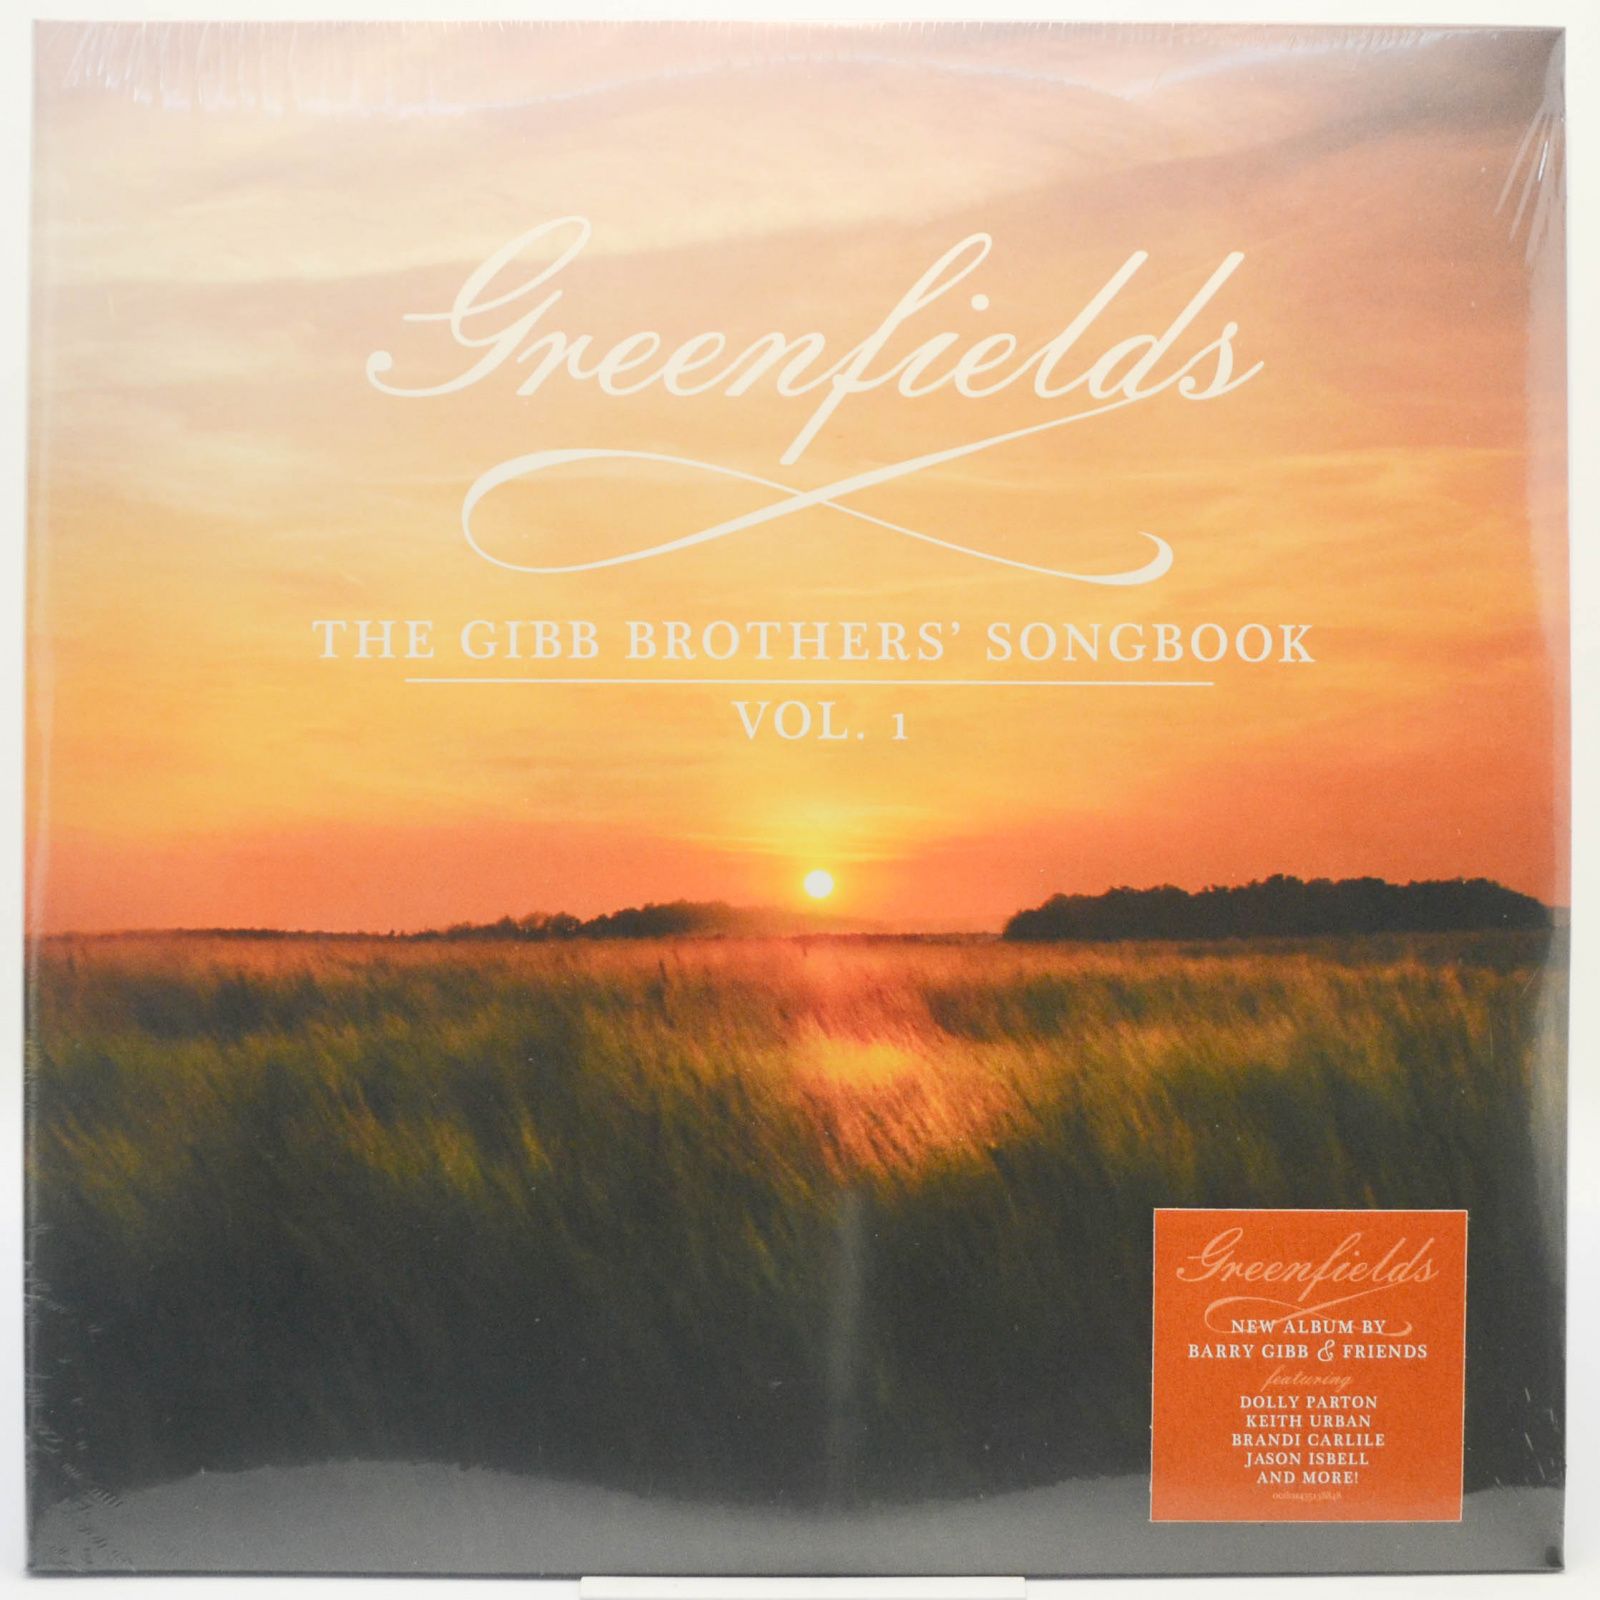 Greenfields: The Gibb Brothers' Songbook Vol. 1 (2LP), 2021